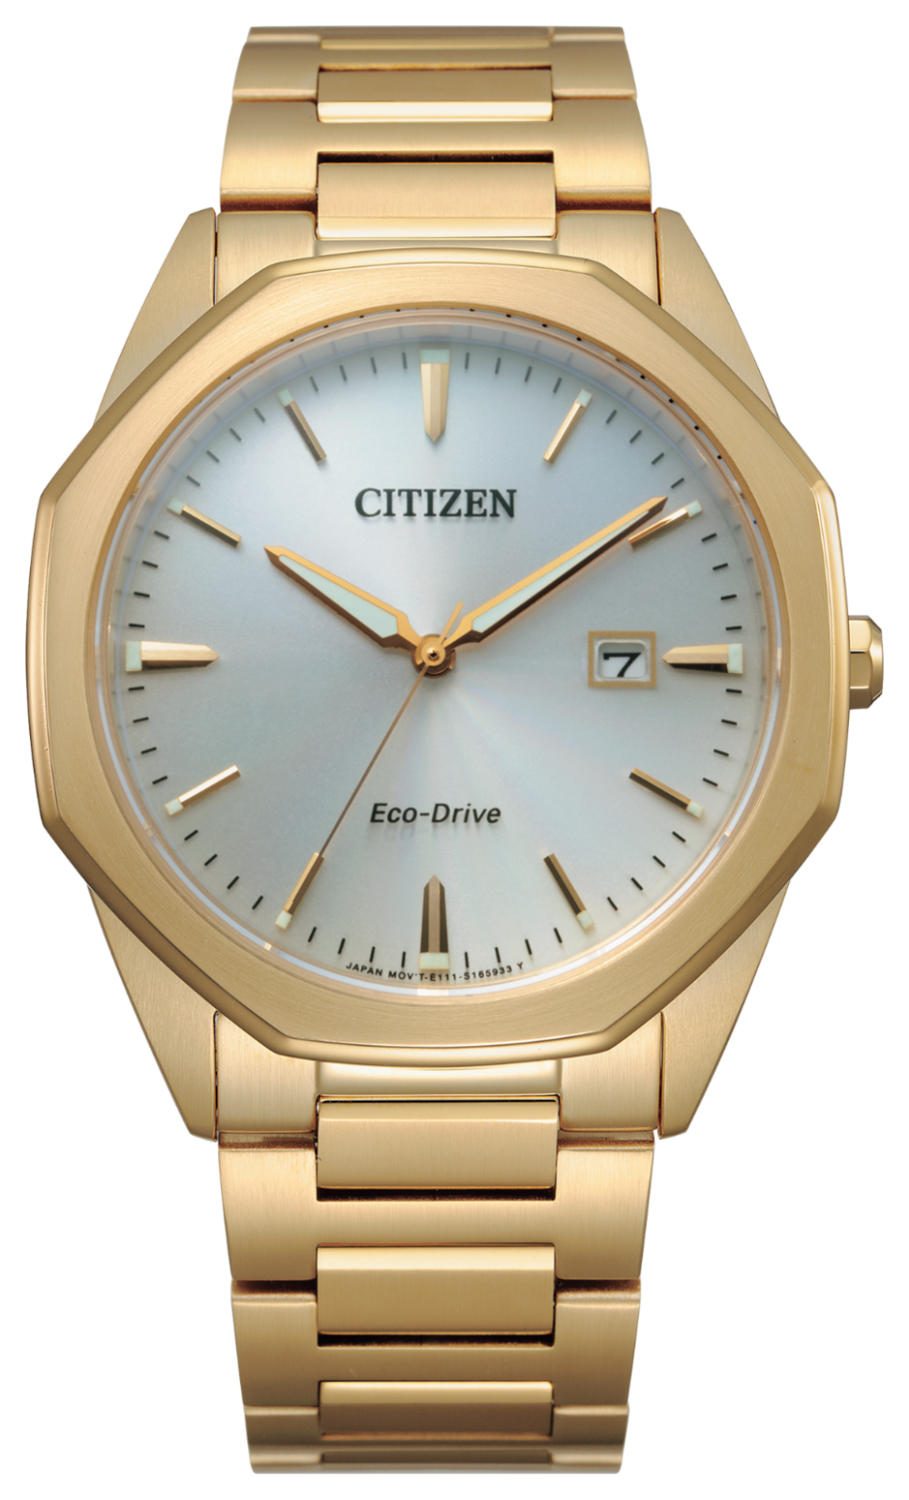 Citizen Eco-drive Corso BM7492-57A 41mm men's watch Sapphire crystal 100m WR silver dial Eco-drive movement (solar or light powered)